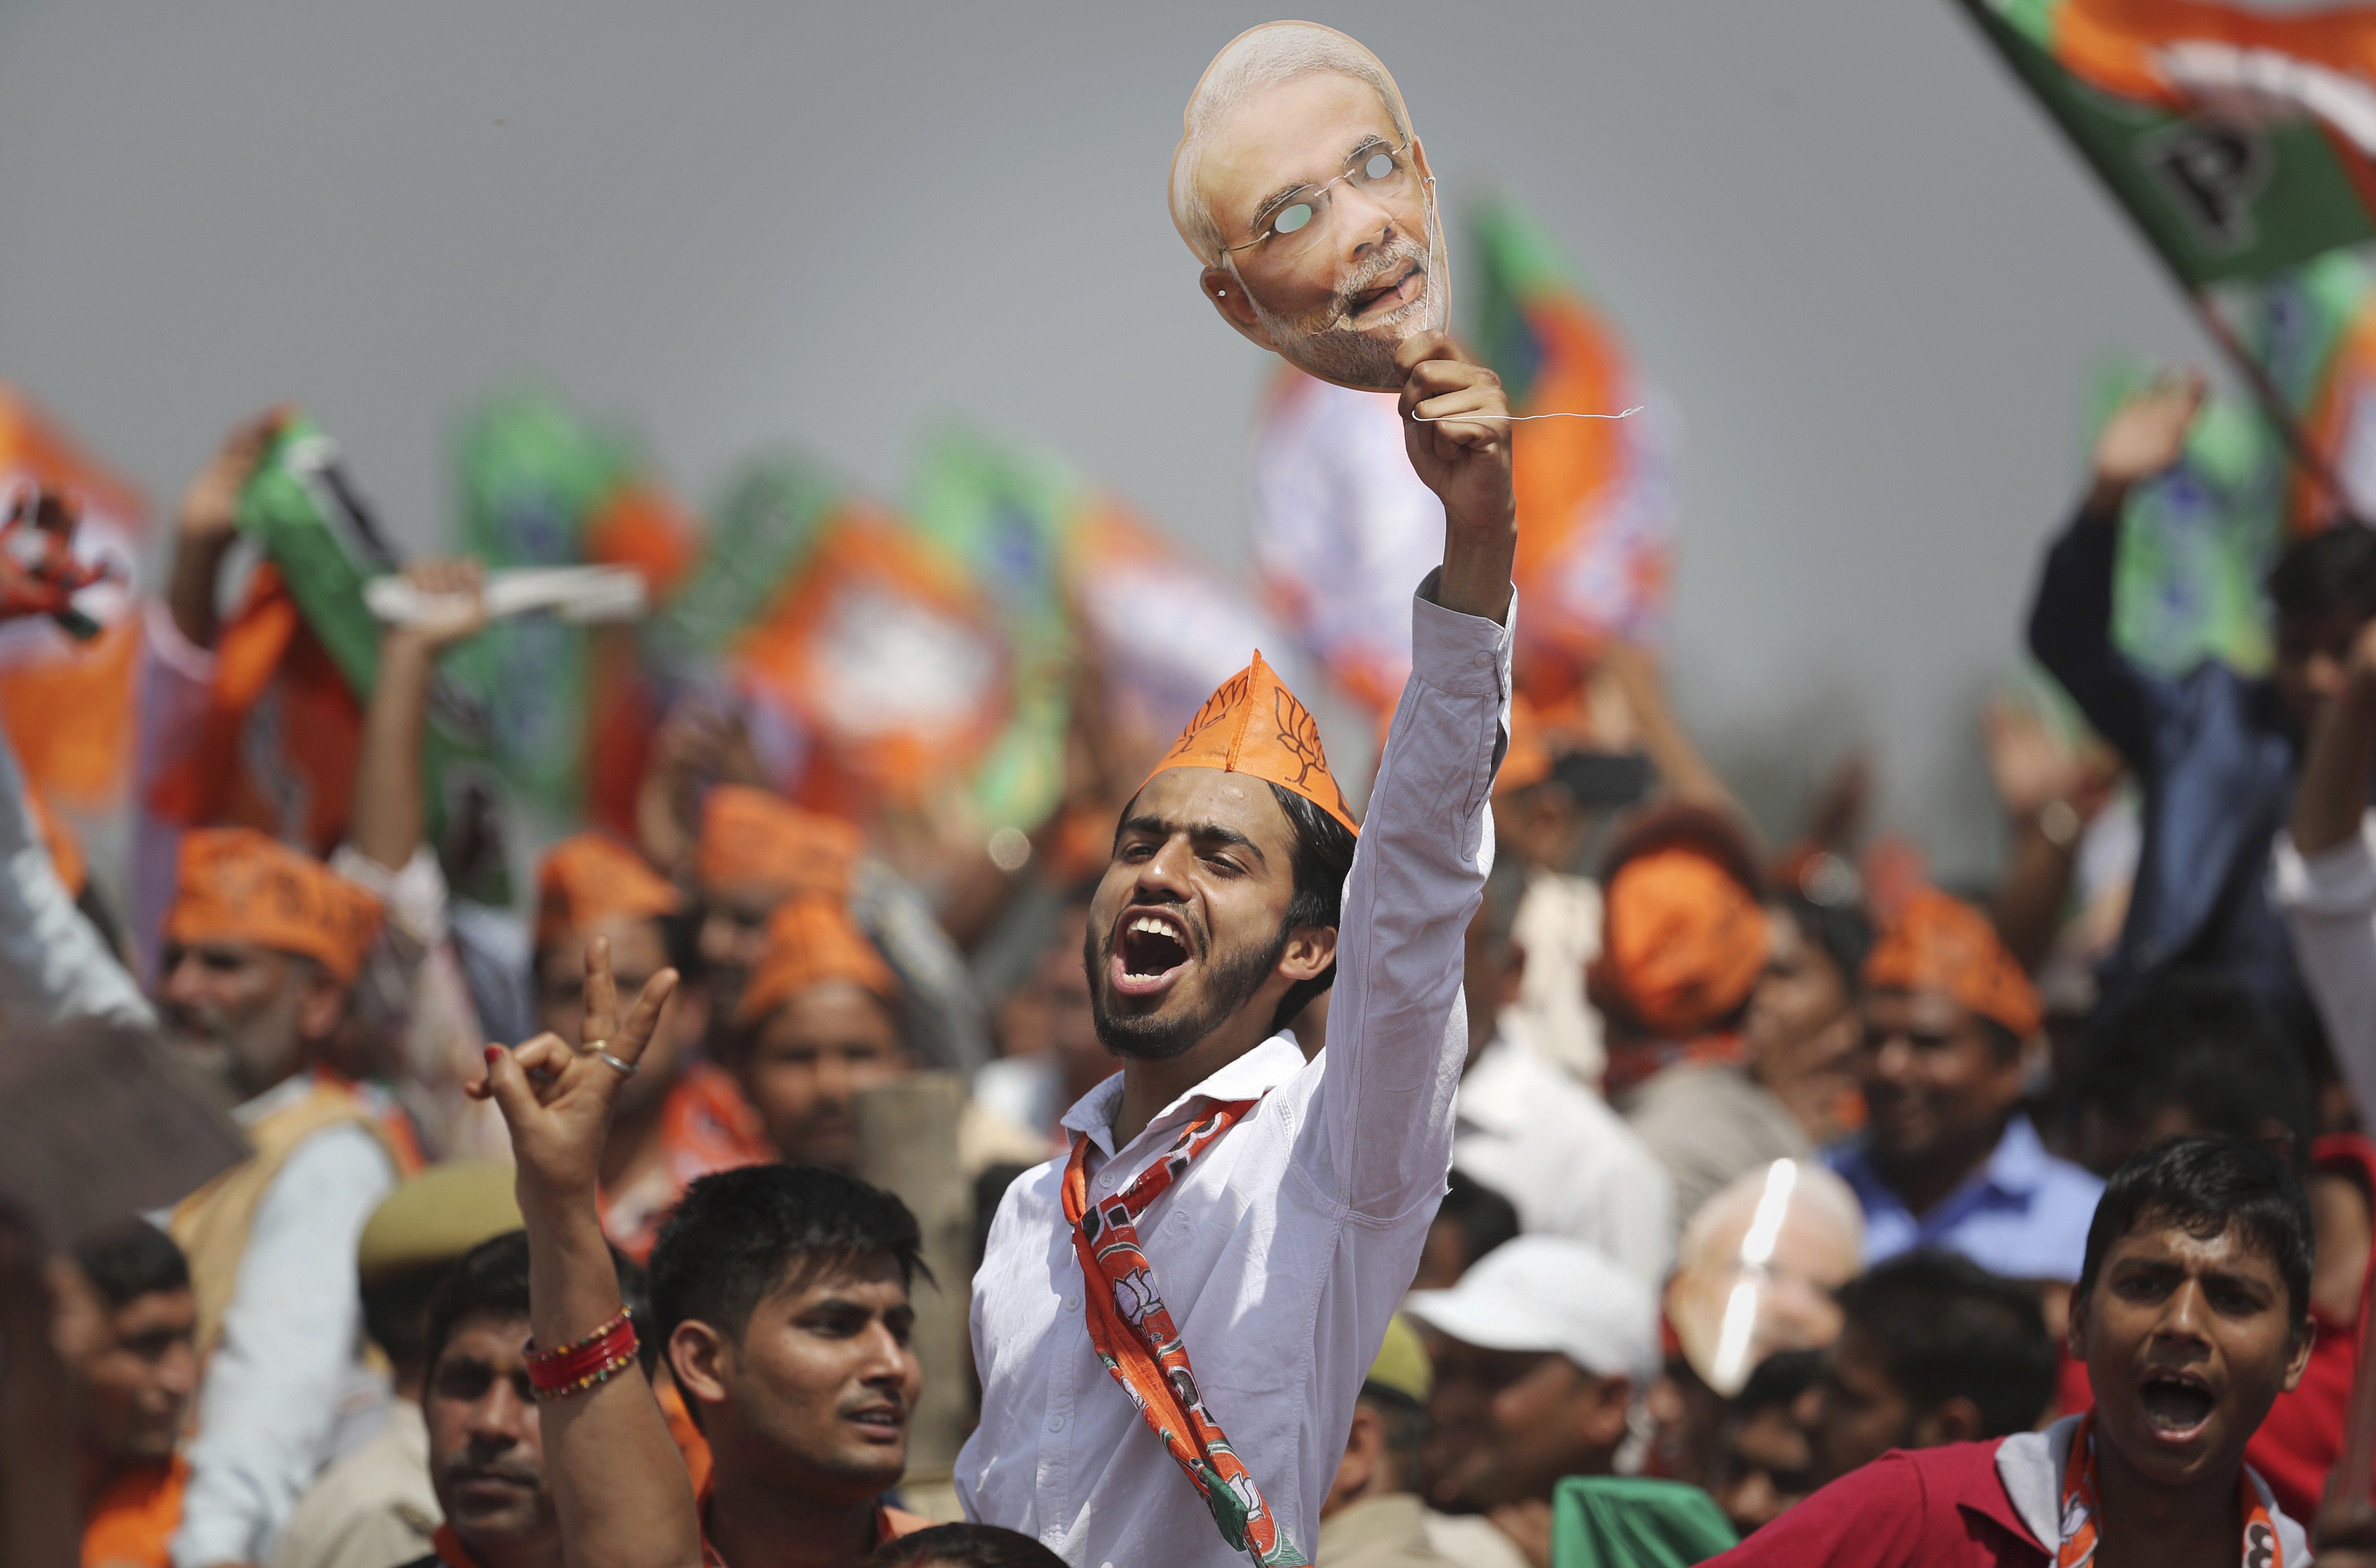 A BJP supporter shouts slogans as he holds up a mask of Indian Prime Minister Narendra Modi during an election rally in Meerut, India, on March 29. Photo: AP